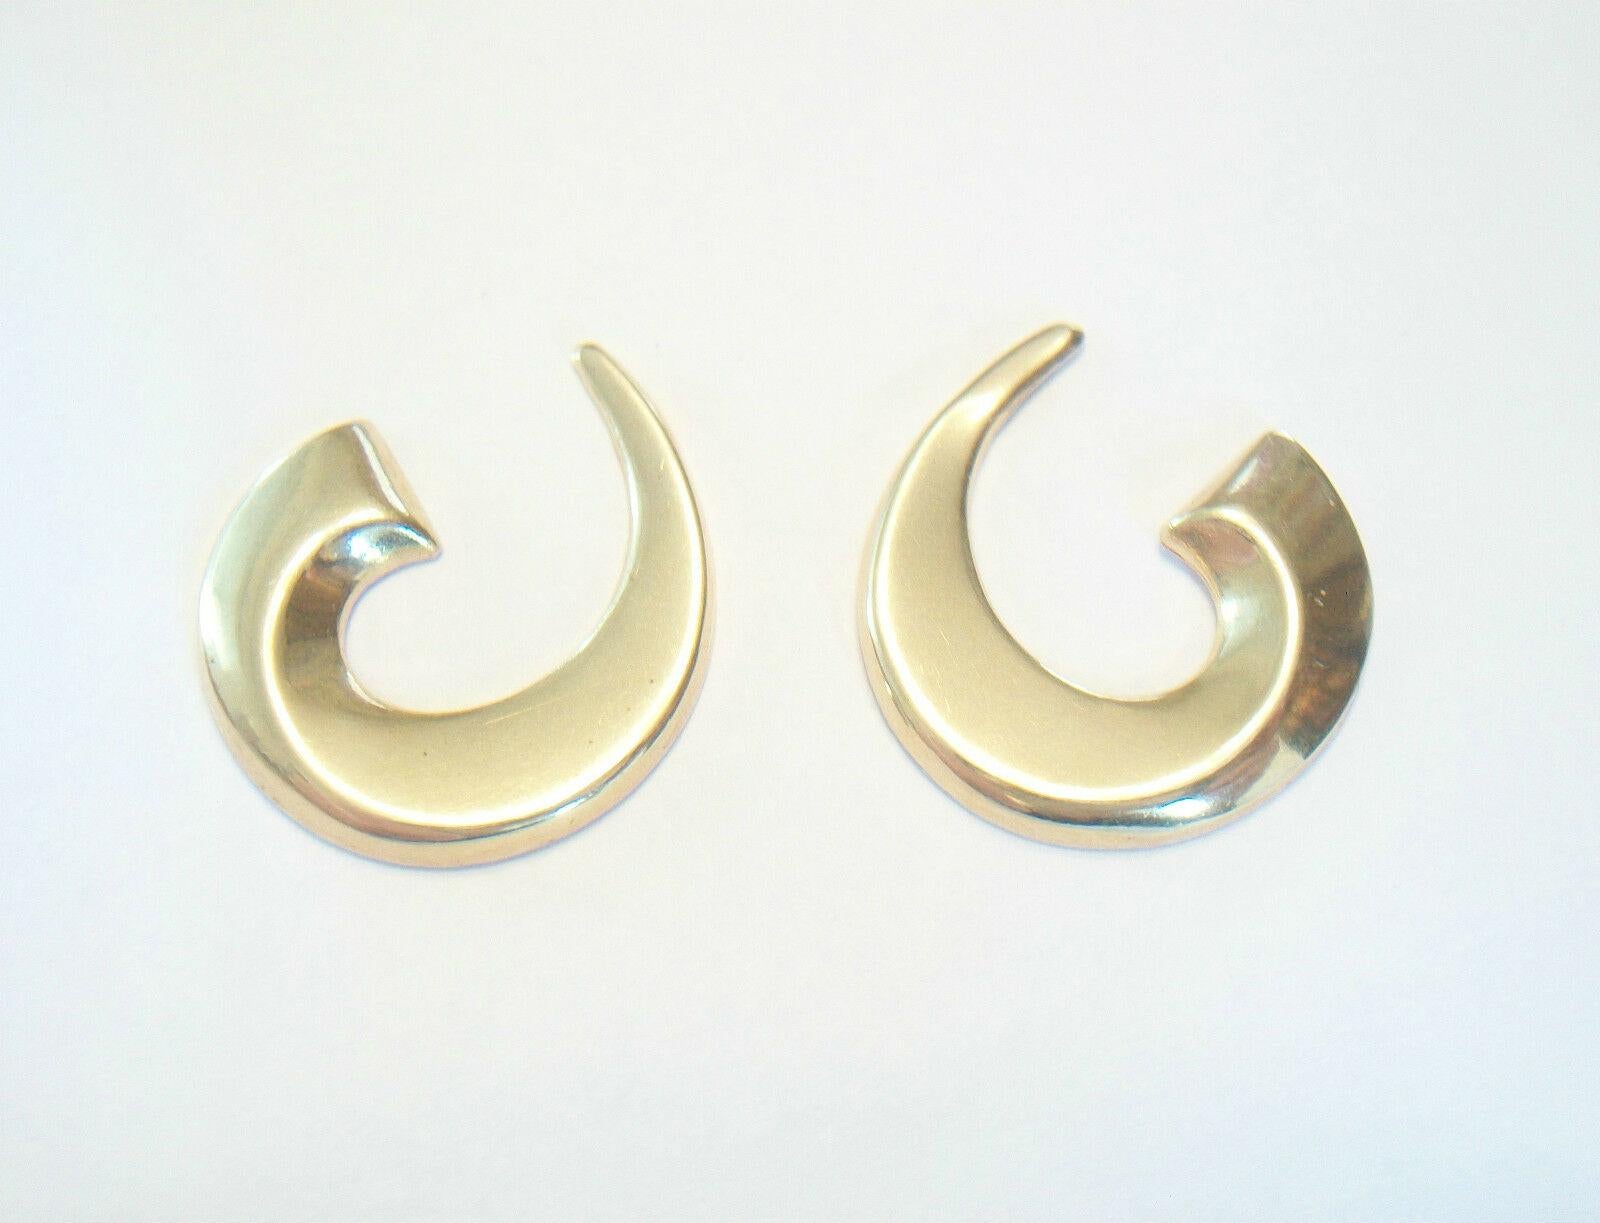 Women's Vintage 14k Yellow Gold 'C' Scroll Earrings, Signed, U.S, Late 20th Century For Sale